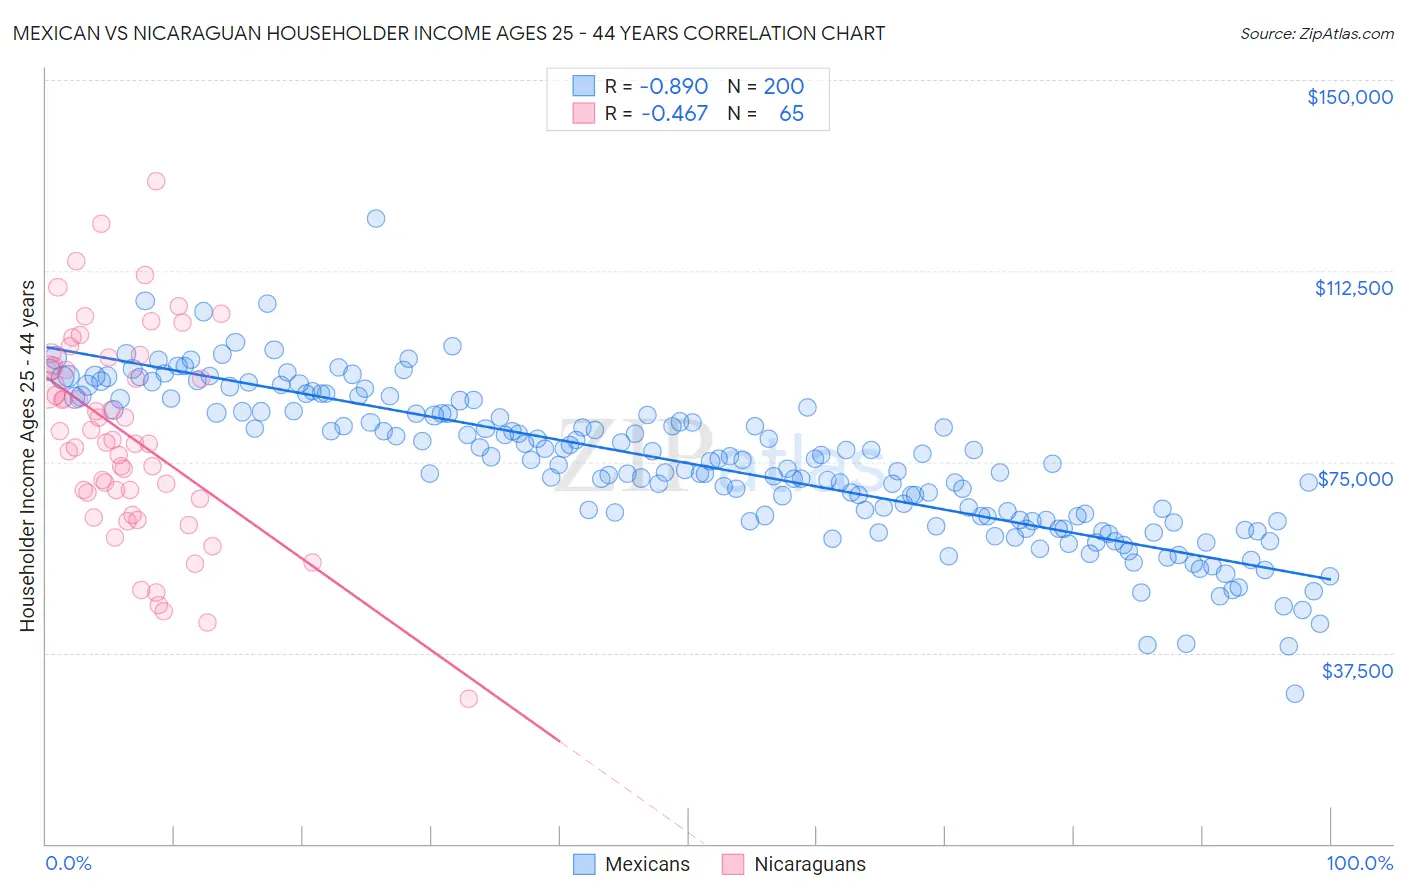 Mexican vs Nicaraguan Householder Income Ages 25 - 44 years